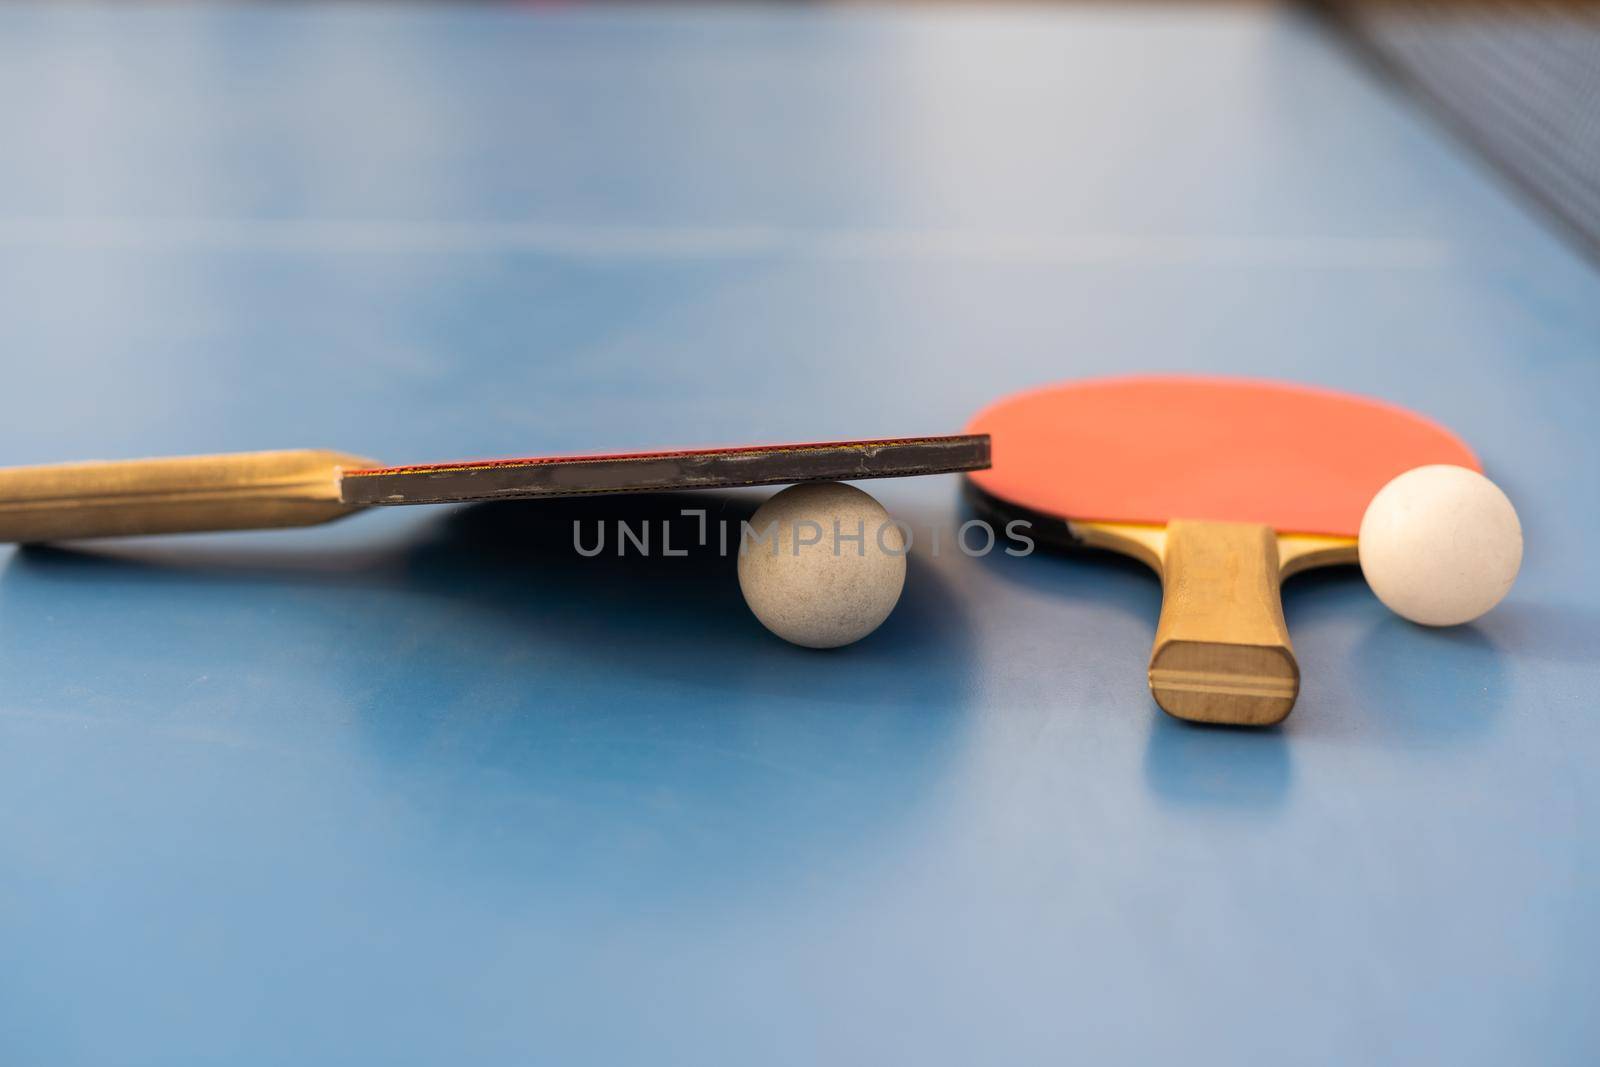 Ping pong table, rackets and balls in a sport hall.